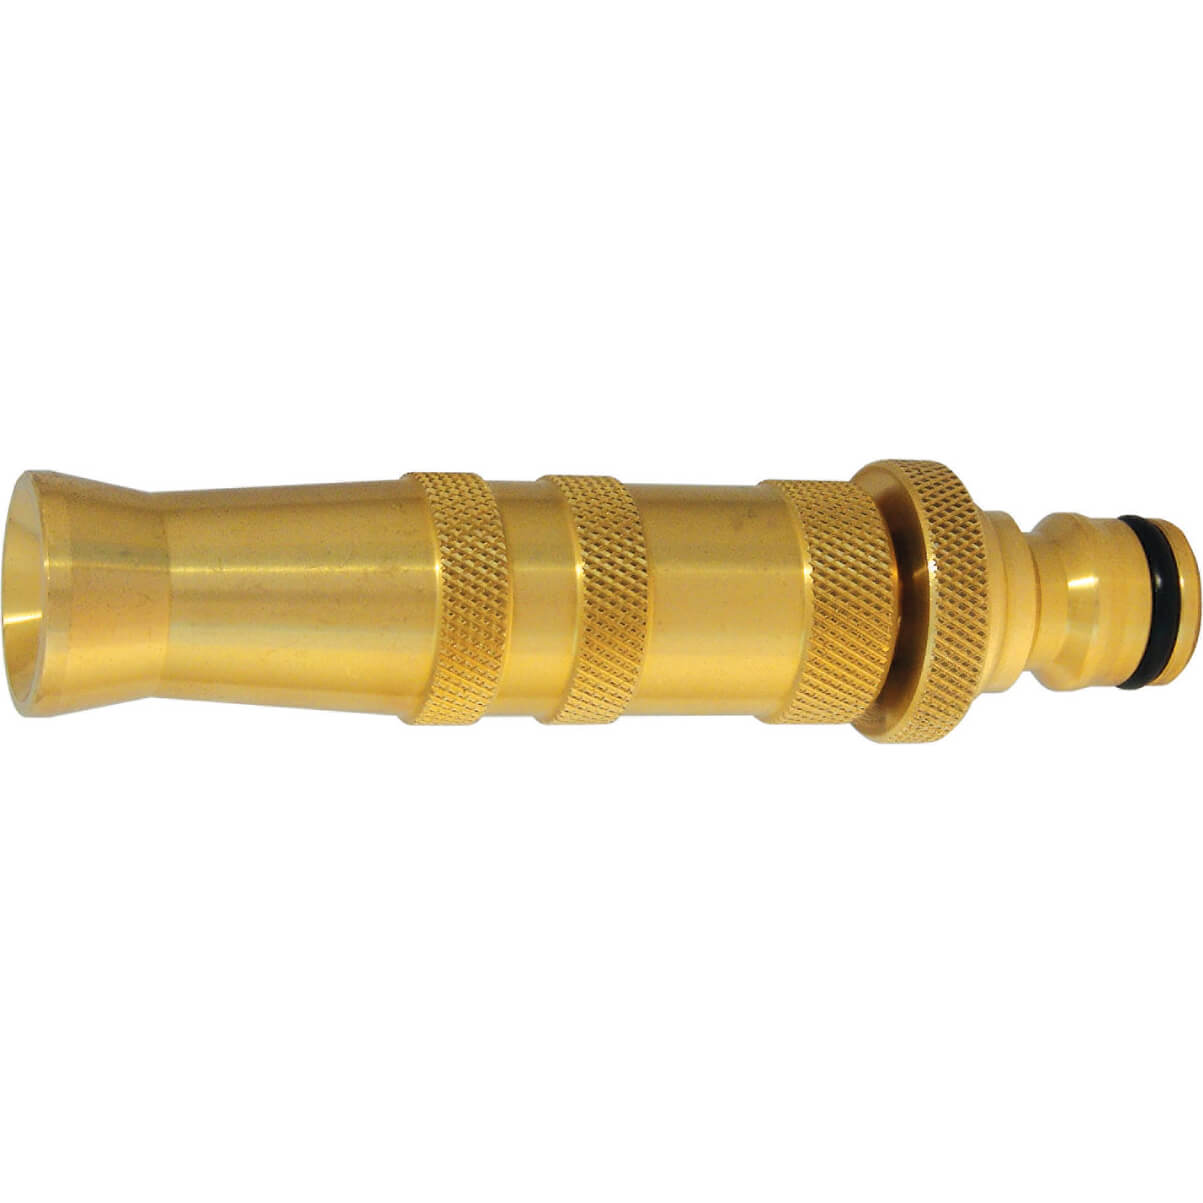 Image of CK Adjustable Brass Water Spray Nozzle 12.5mm